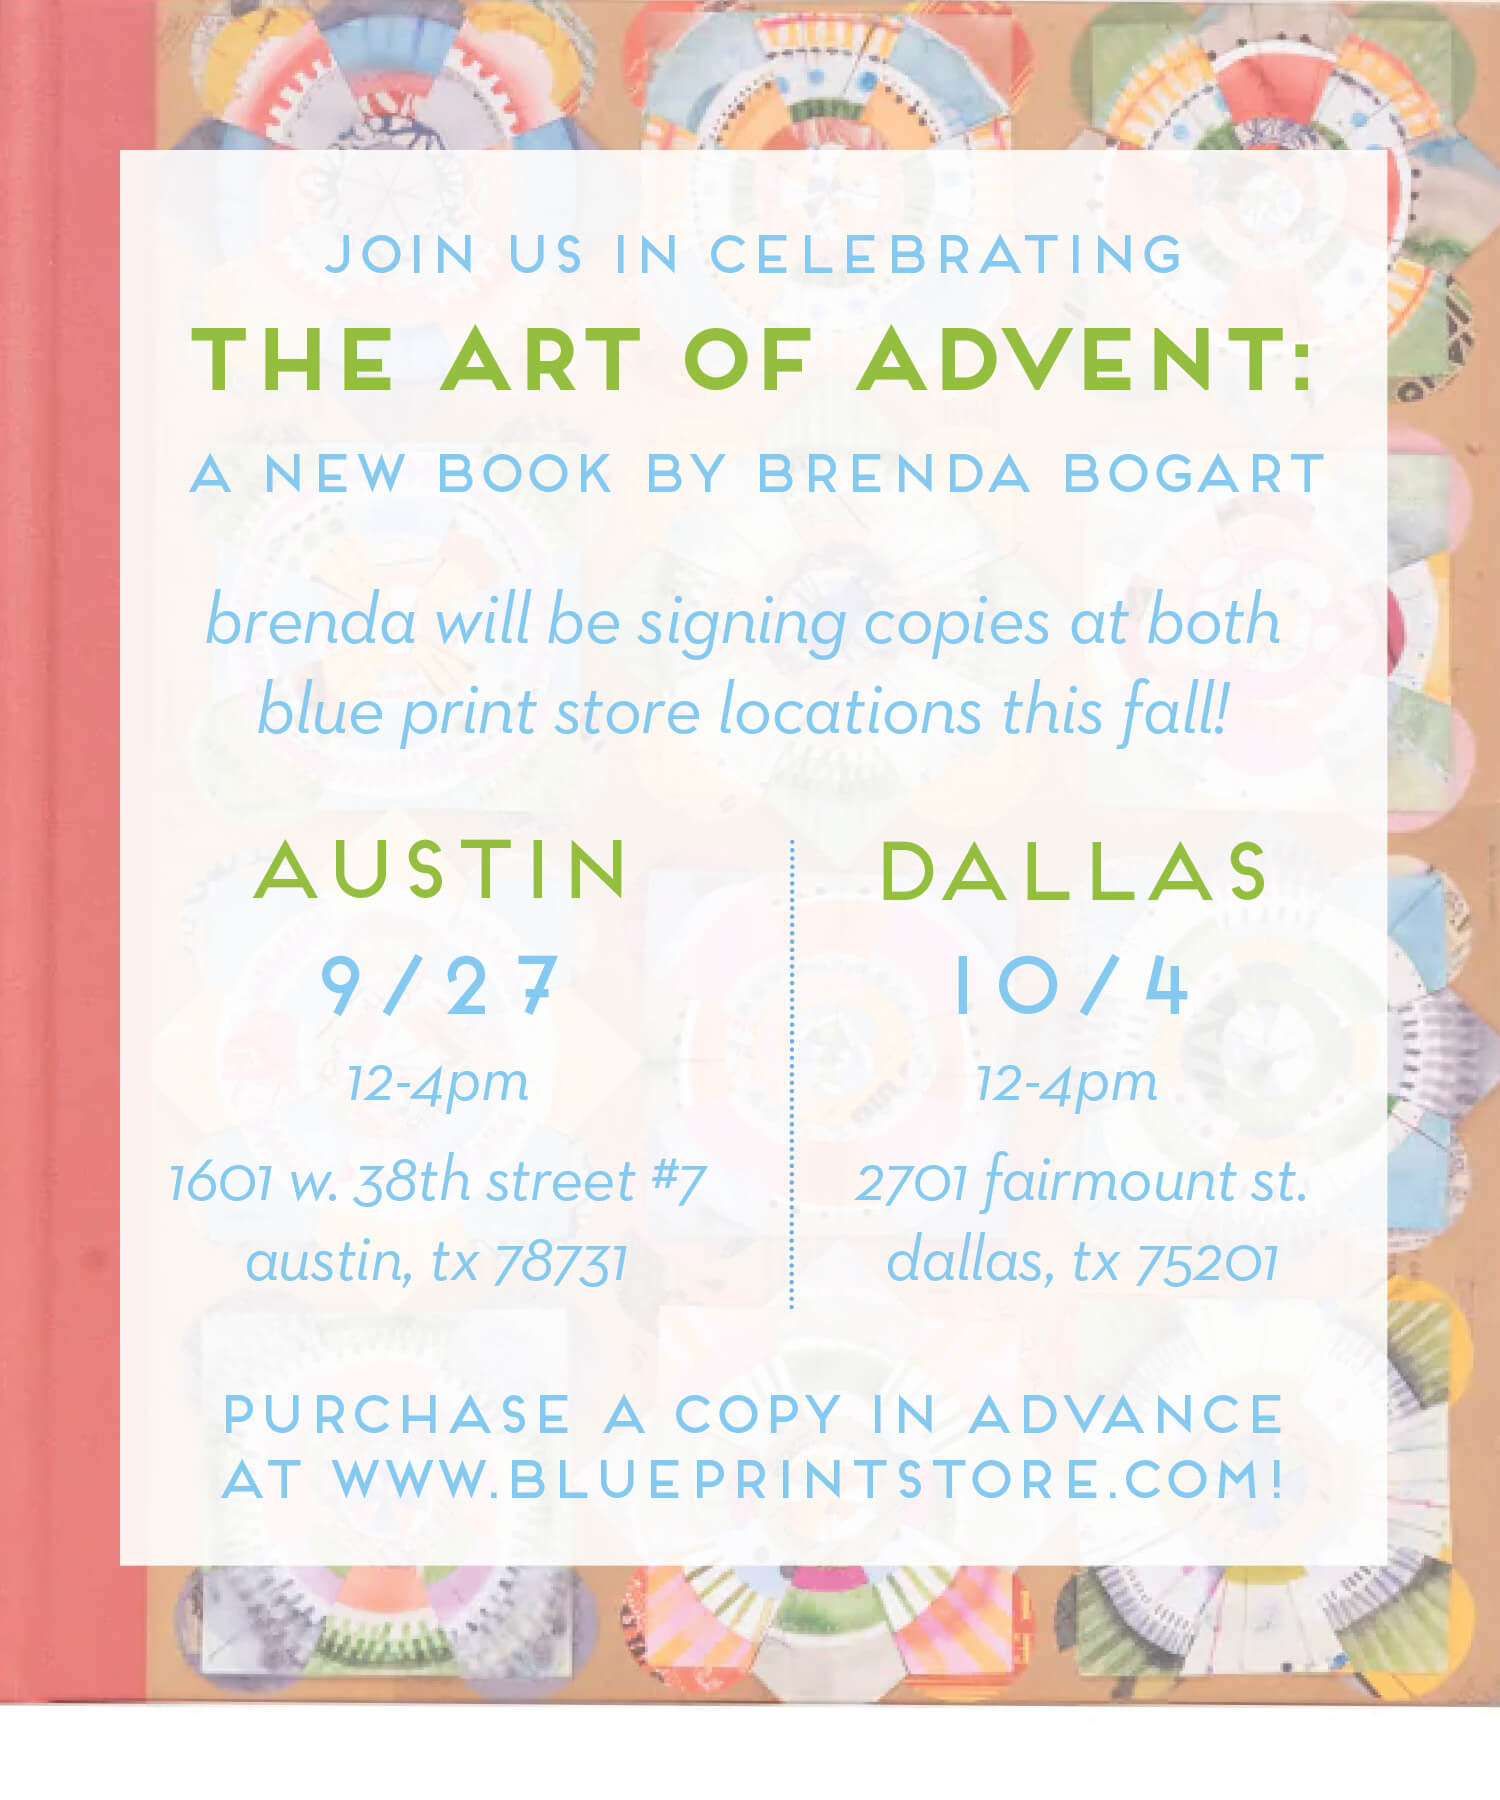 Photo for Book Signing for The Art of Advent, Brenda Bogart news post